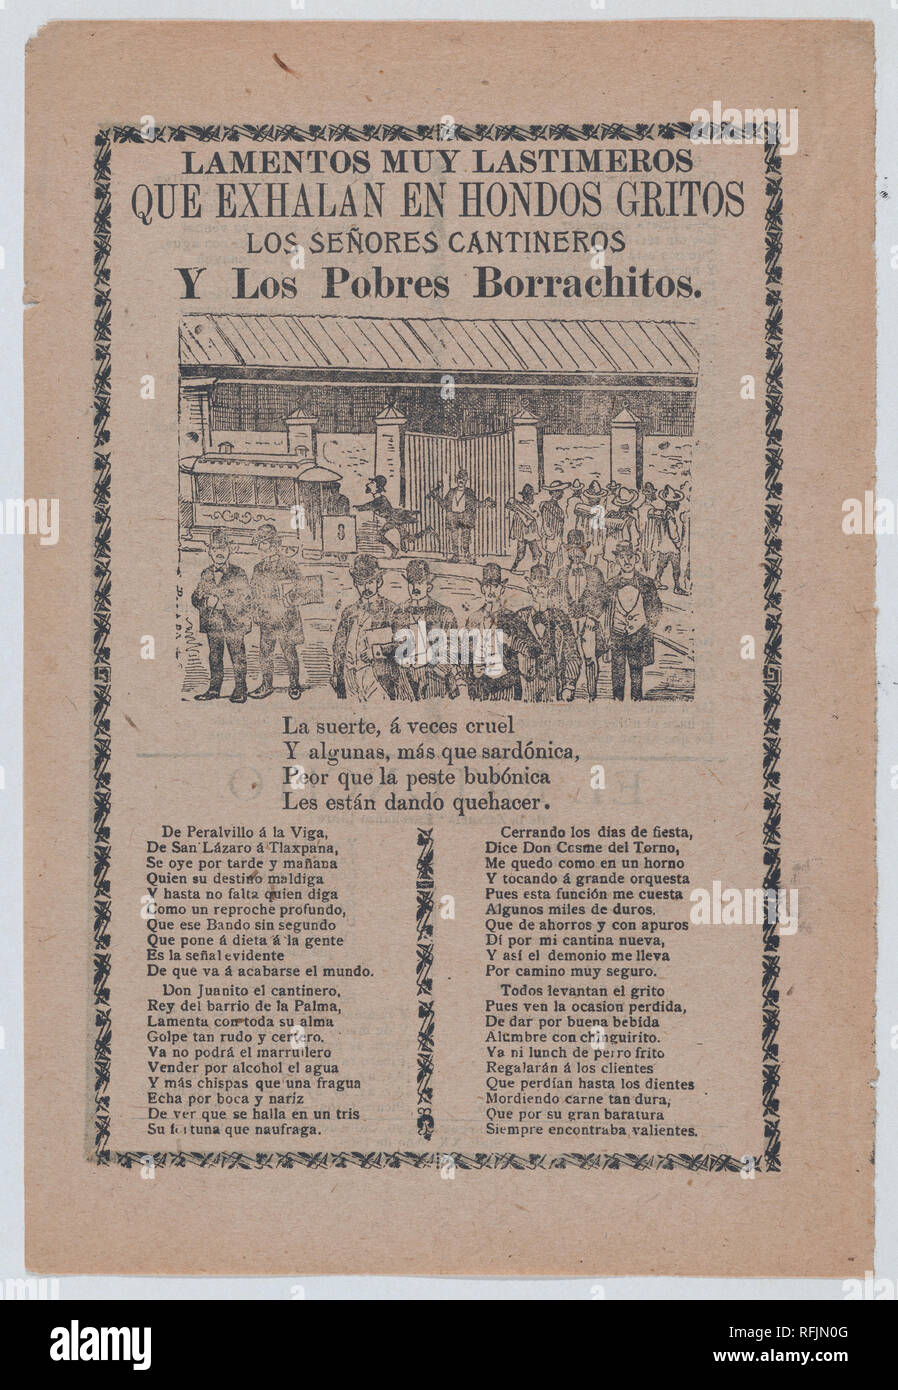 Broadsheet relating to men who frequent bars, different groups of men walking in the streets and one man running after a trolley car. Artist: José Guadalupe Posada (Mexican, 1851-1913). Dimensions: Sheet: 11 13/16 × 7 7/8 in. (30 × 20 cm). Publisher: Antonio Vanegas Arroyo (1850-1917, Mexican). Date: ca. 1903. Museum: Metropolitan Museum of Art, New York, USA. Stock Photo